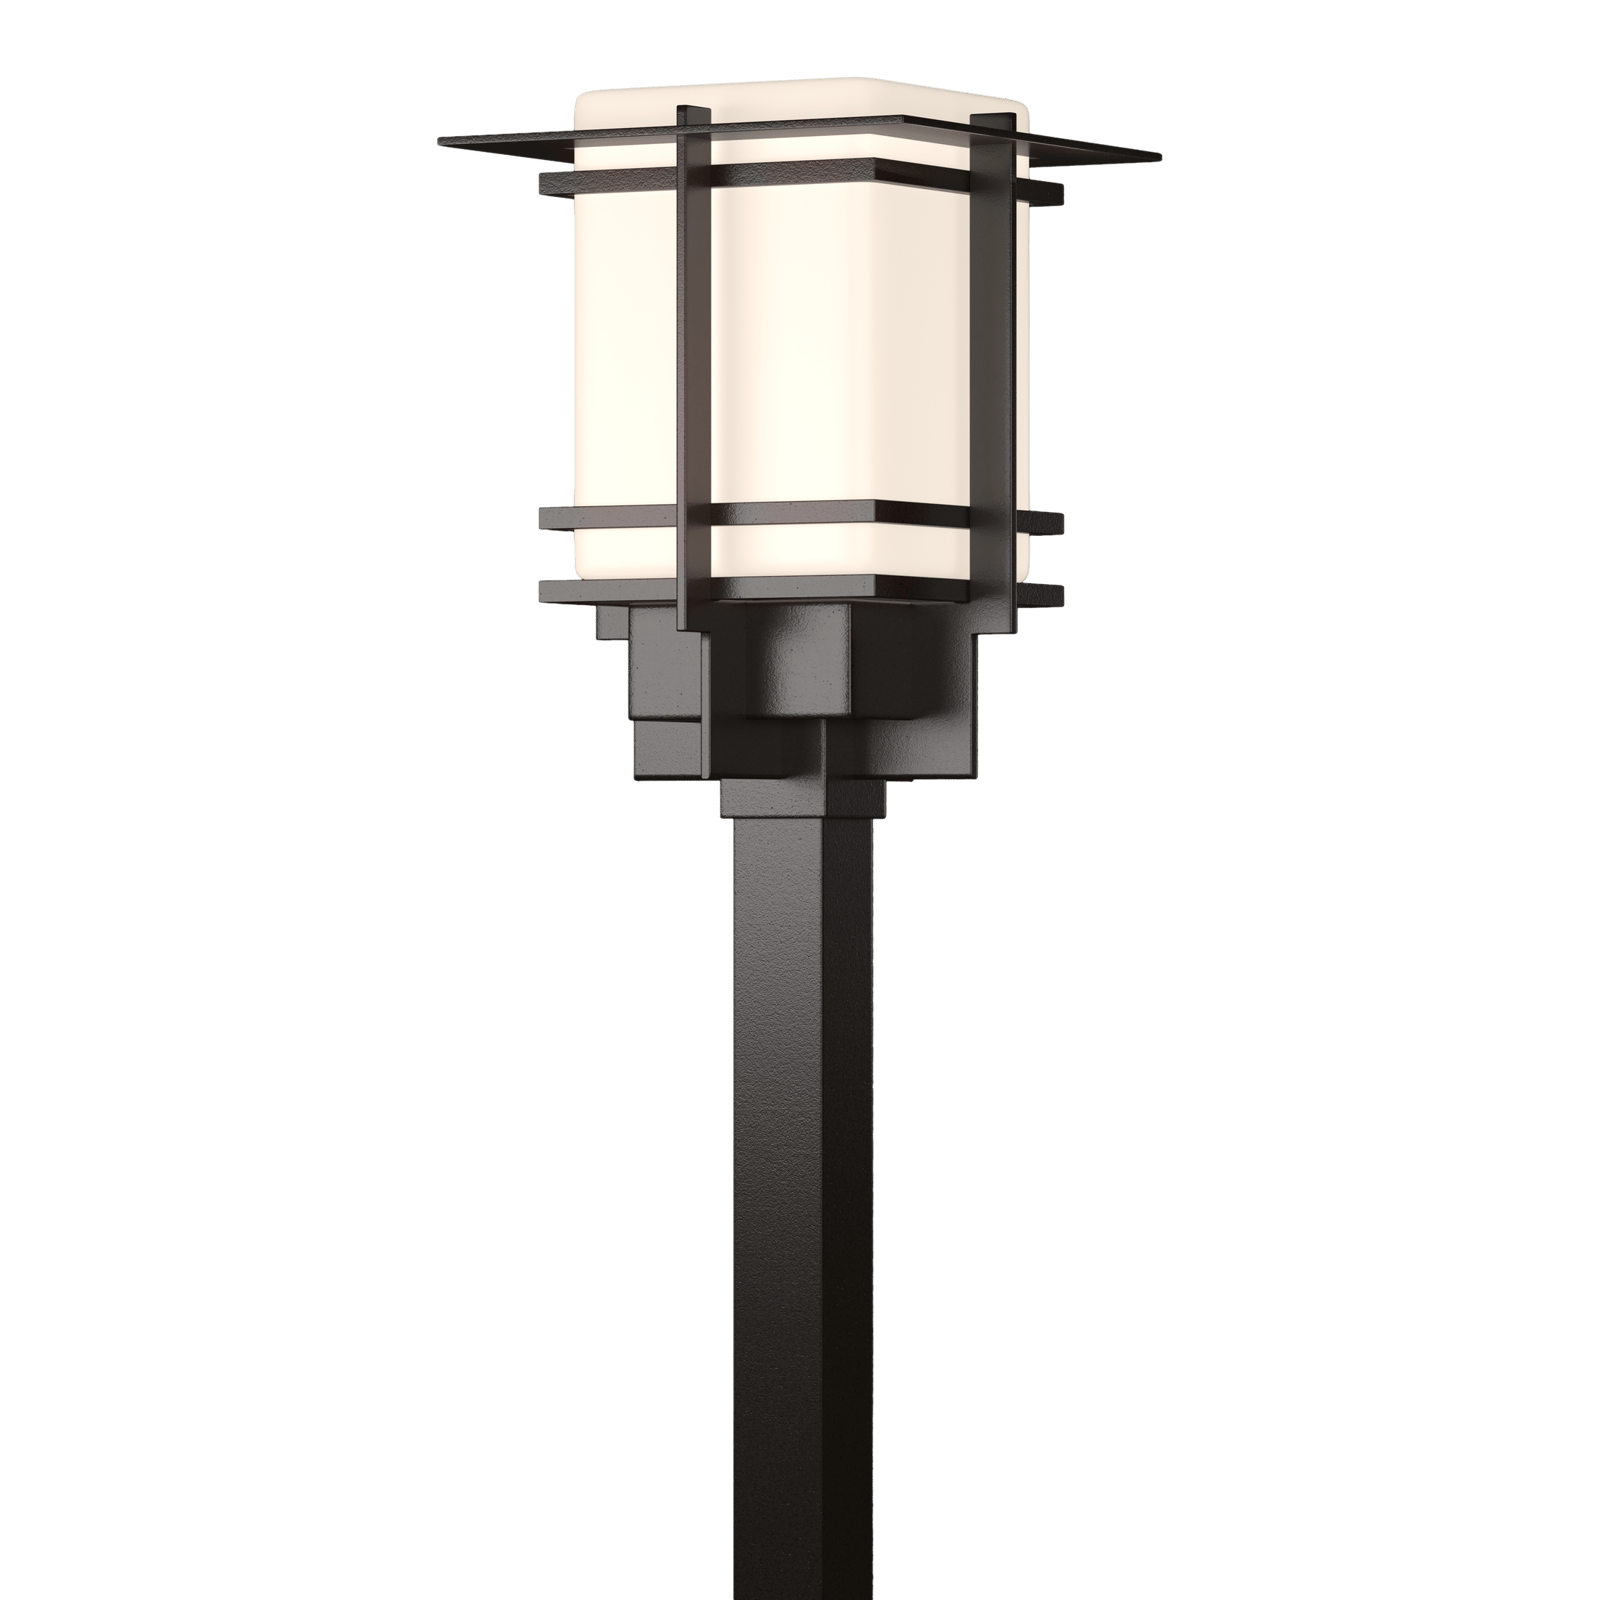 Hubbardton Forge Tourou Large Outdoor Post Light Outdoor l Post/Pier Mounts Hubbardton Forge Coastal Oil Rubbed Bronze Opal Glass (GG) 